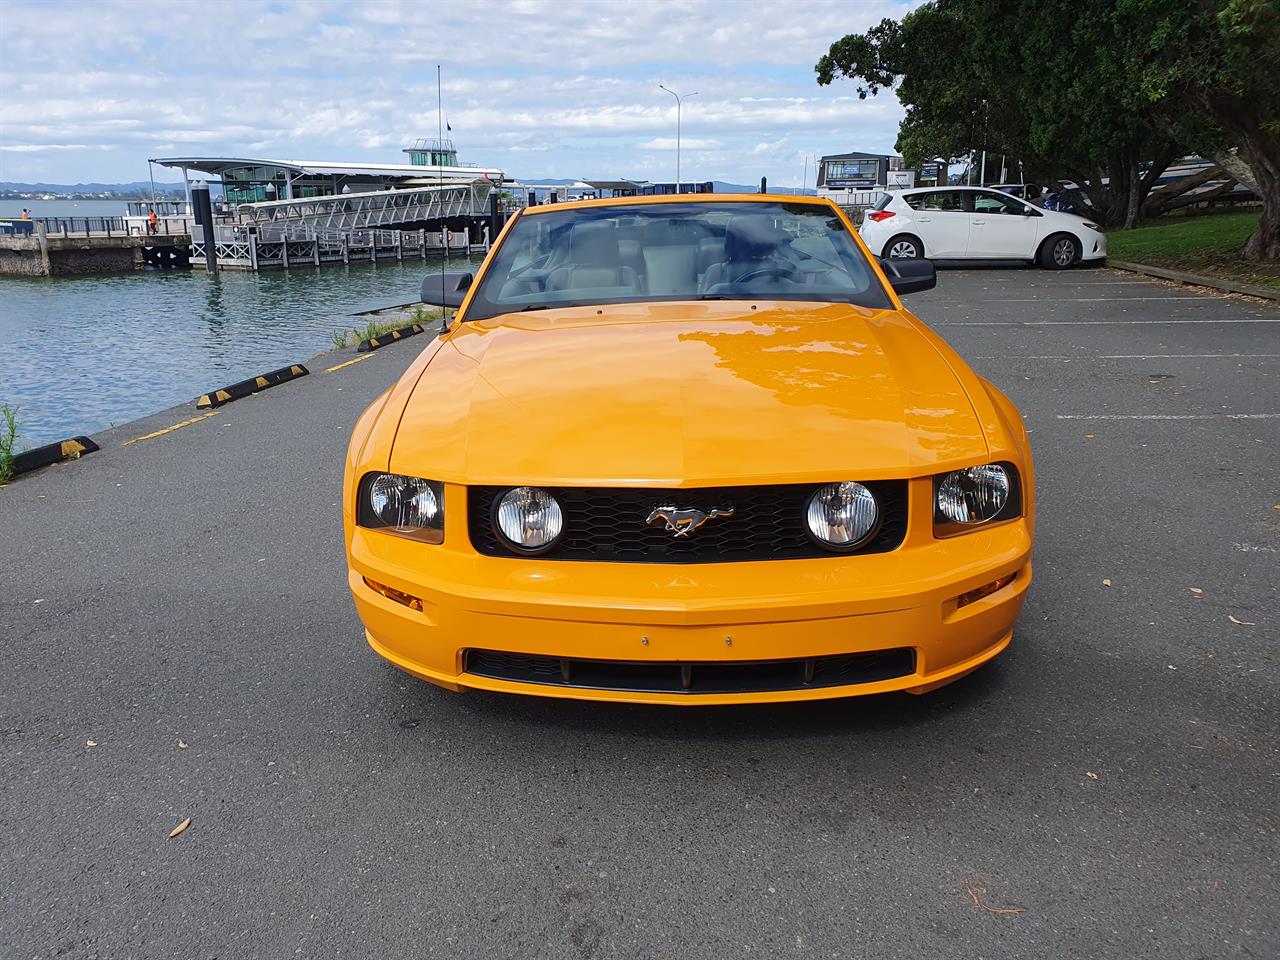 2007 FORD MUSTANG